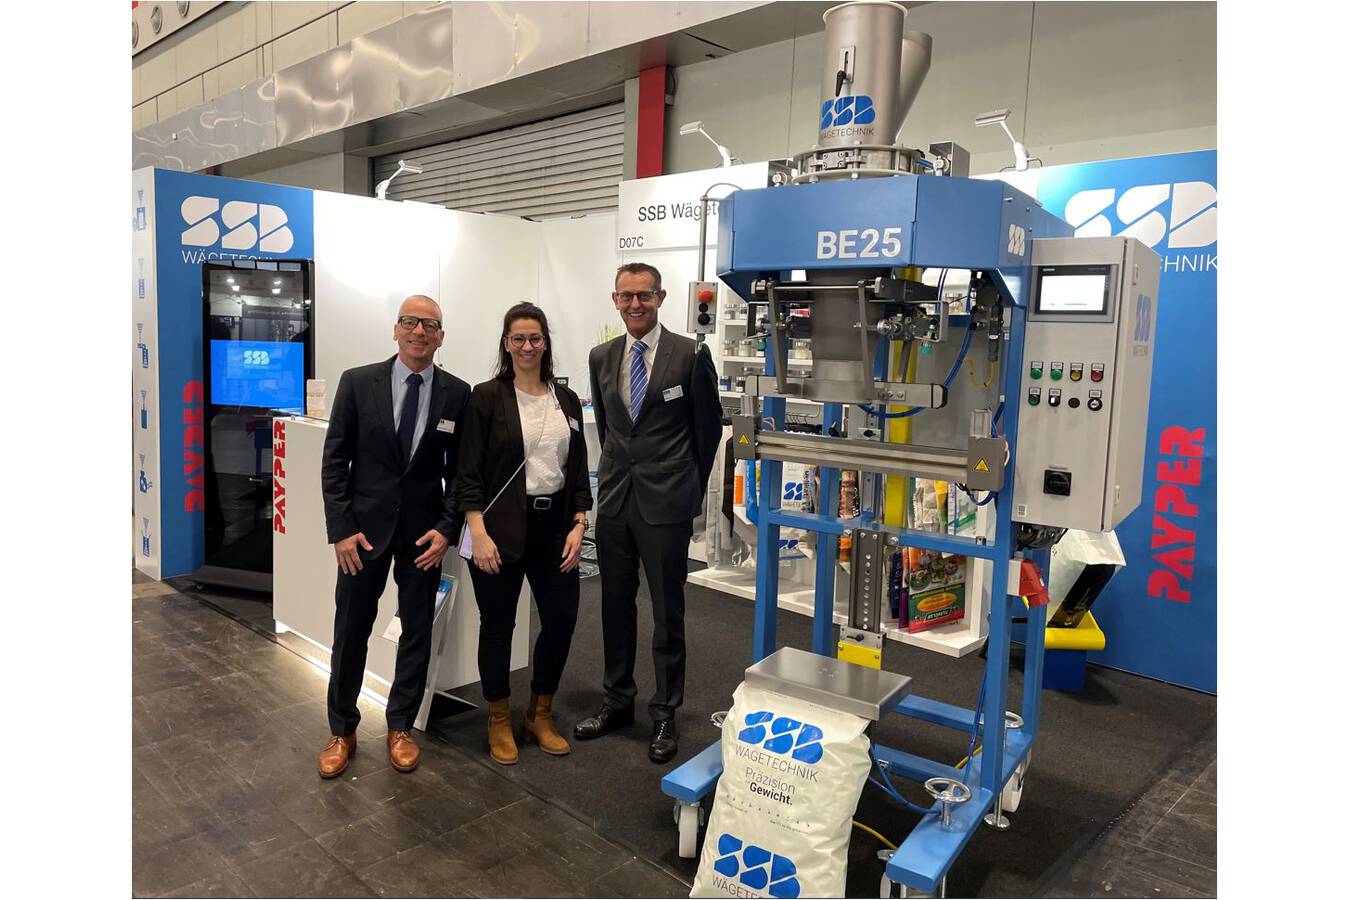 Successful SOLIDS 2023 for SSB Wägetechnik Two exciting trade fair days at solids in Dortmund for the SSB team.